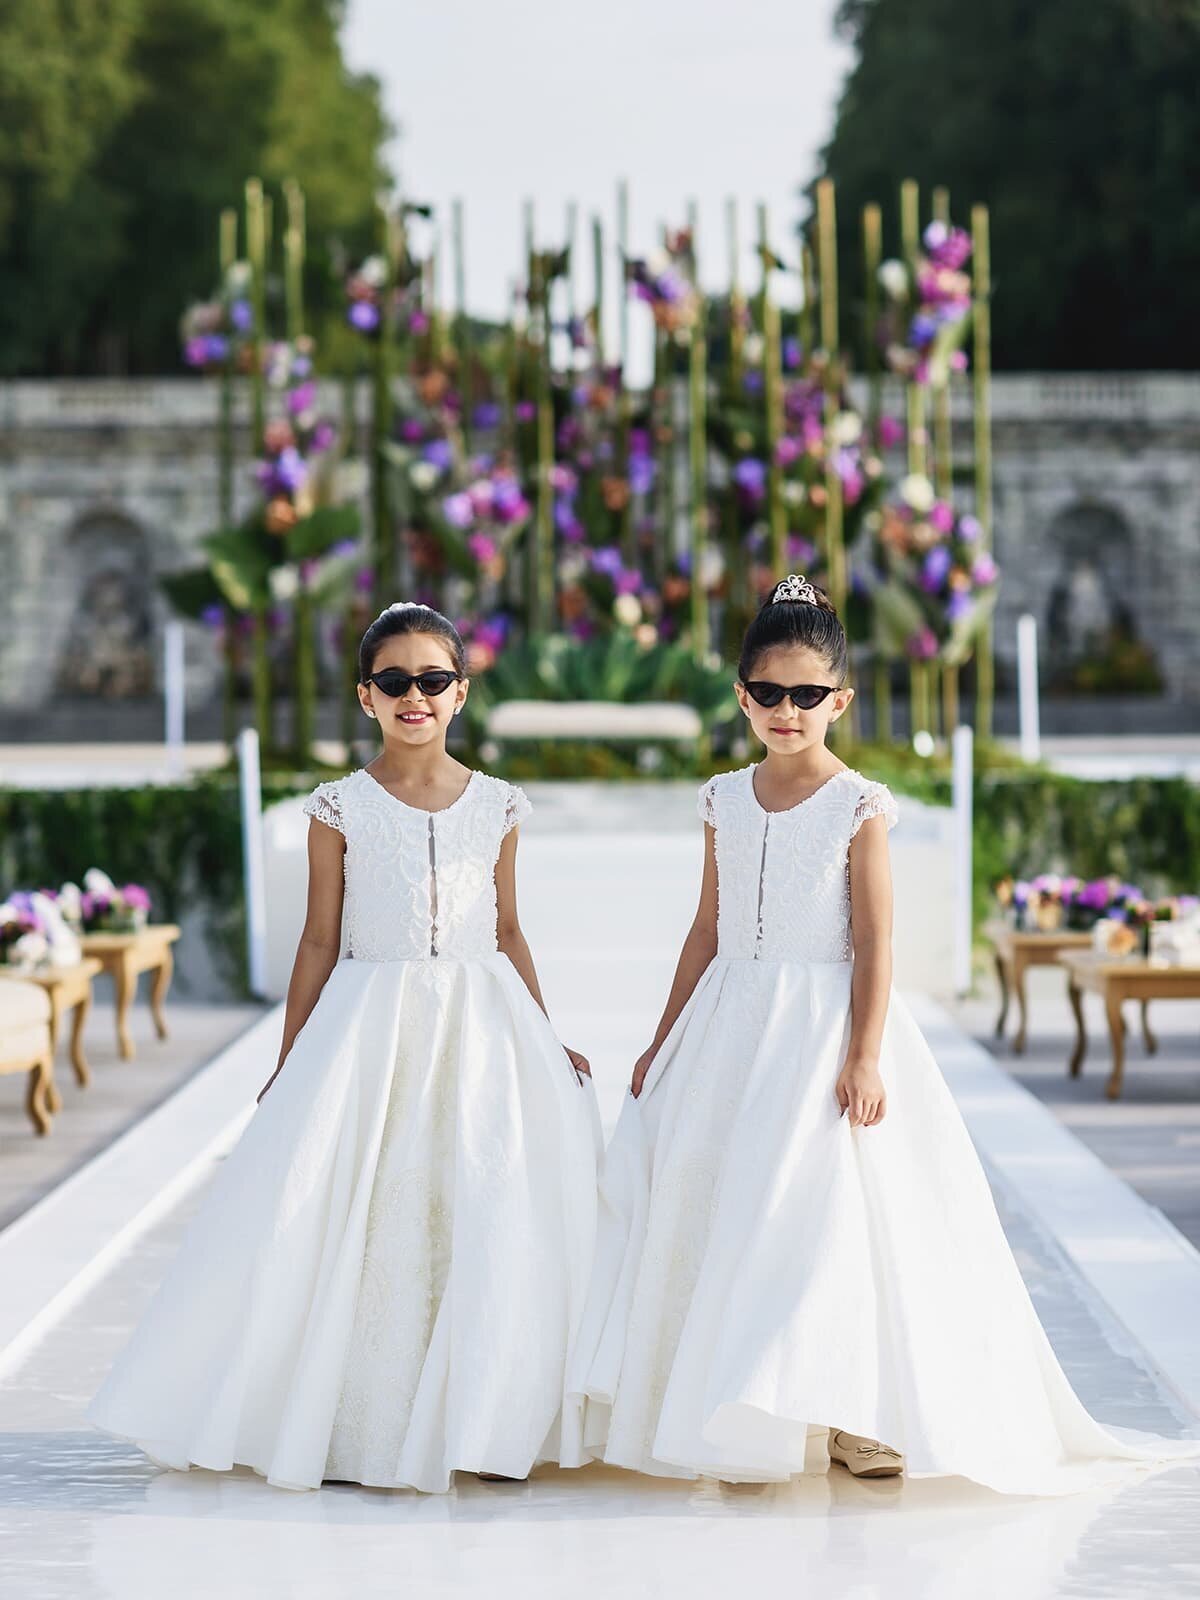 Two young girls in white dresses walking down wedding aisle